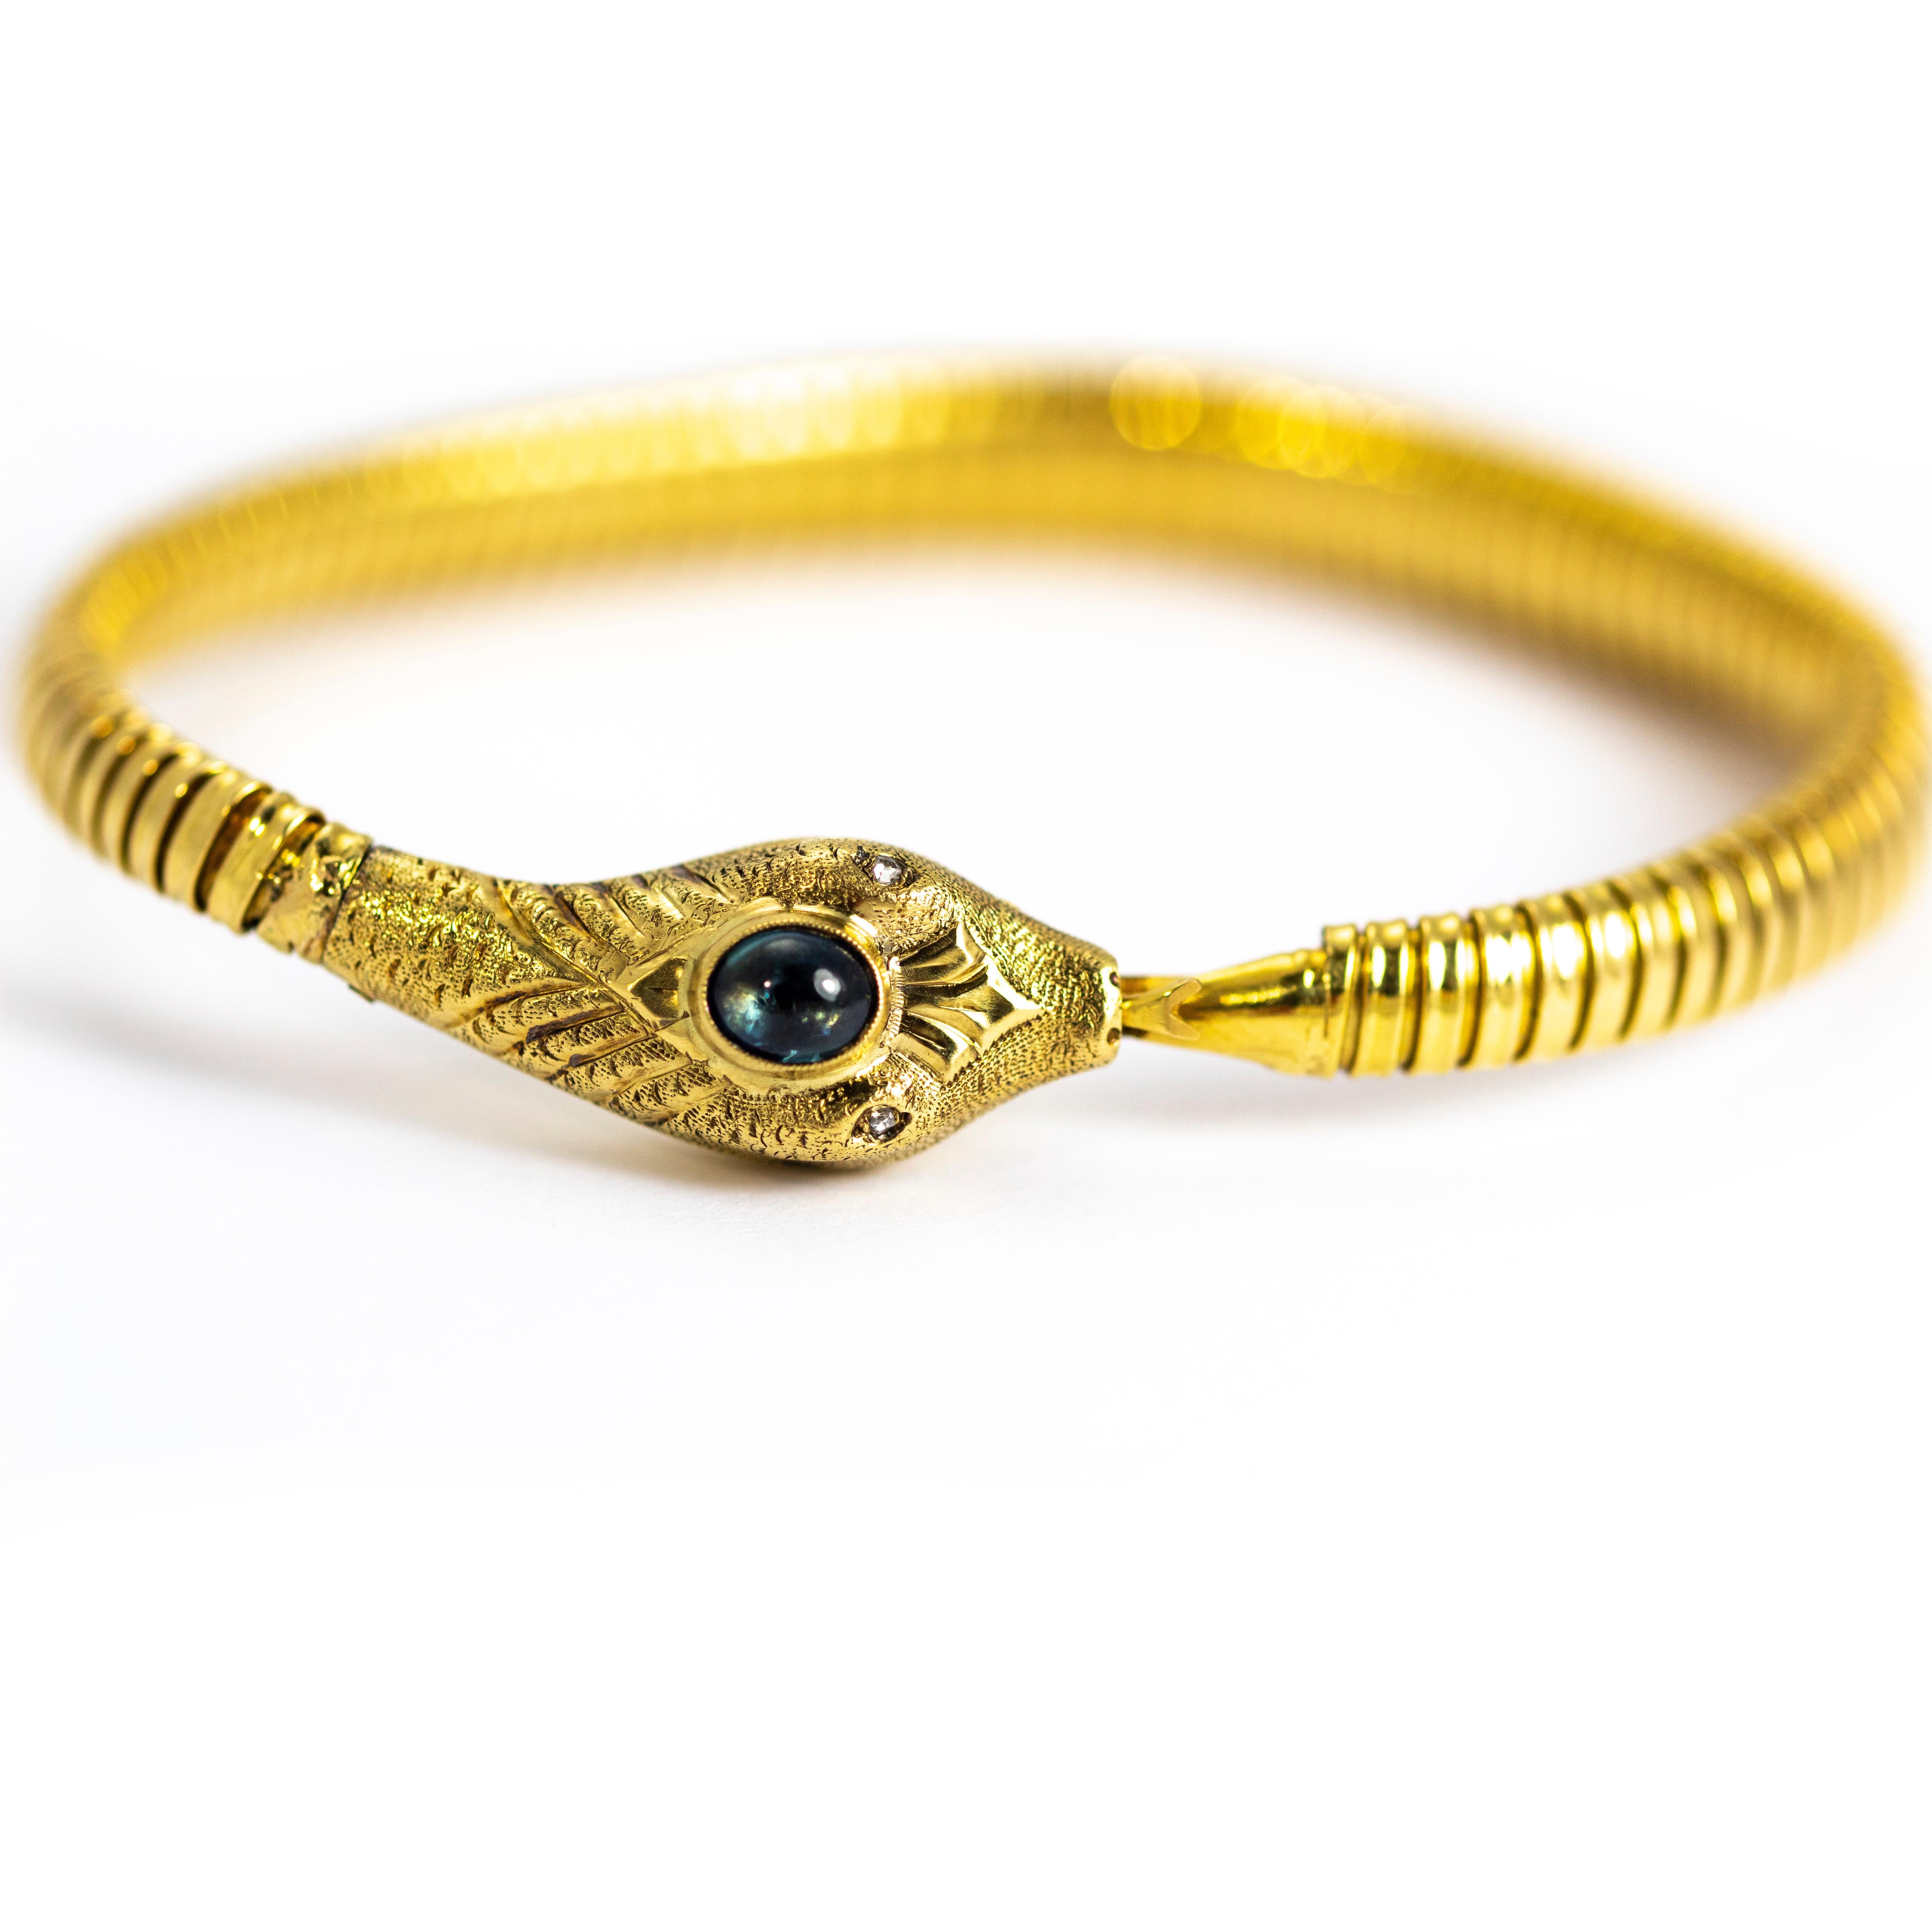 This flexible coiled snake bracelet is fabulous! It holds an oval sapphire cabochon at the centre of its head and has rose cut diamond eyes. The whole of the head has fine engraved detail on it with teeth and textured skin. The most charming detail